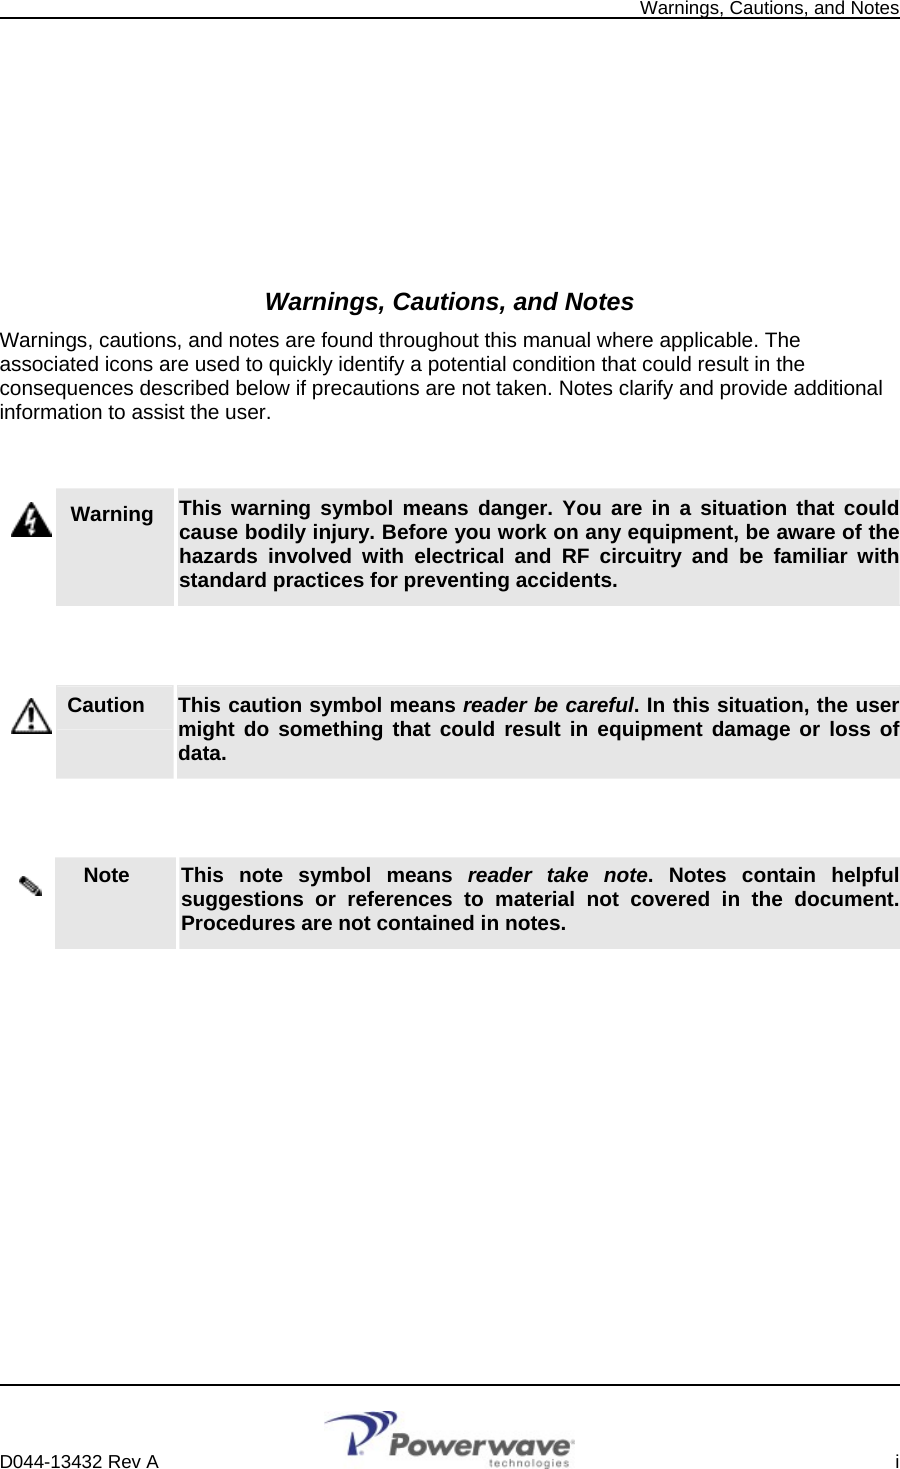   Warnings, Cautions, and Notes          Warnings, Cautions, and Notes Warnings, cautions, and notes are found throughout this manual where applicable. The associated icons are used to quickly identify a potential condition that could result in the consequences described below if precautions are not taken. Notes clarify and provide additional information to assist the user.   Warning   This warning symbol means danger. You are in a situation that could cause bodily injury. Before you work on any equipment, be aware of the hazards involved with electrical and RF circuitry and be familiar with standard practices for preventing accidents.   Caution     This caution symbol means reader be careful. In this situation, the user might do something that could result in equipment damage or loss of data.   Note     This note symbol means reader take note. Notes contain helpful suggestions or references to material not covered in the document. Procedures are not contained in notes.          D044-13432 Rev A    i  